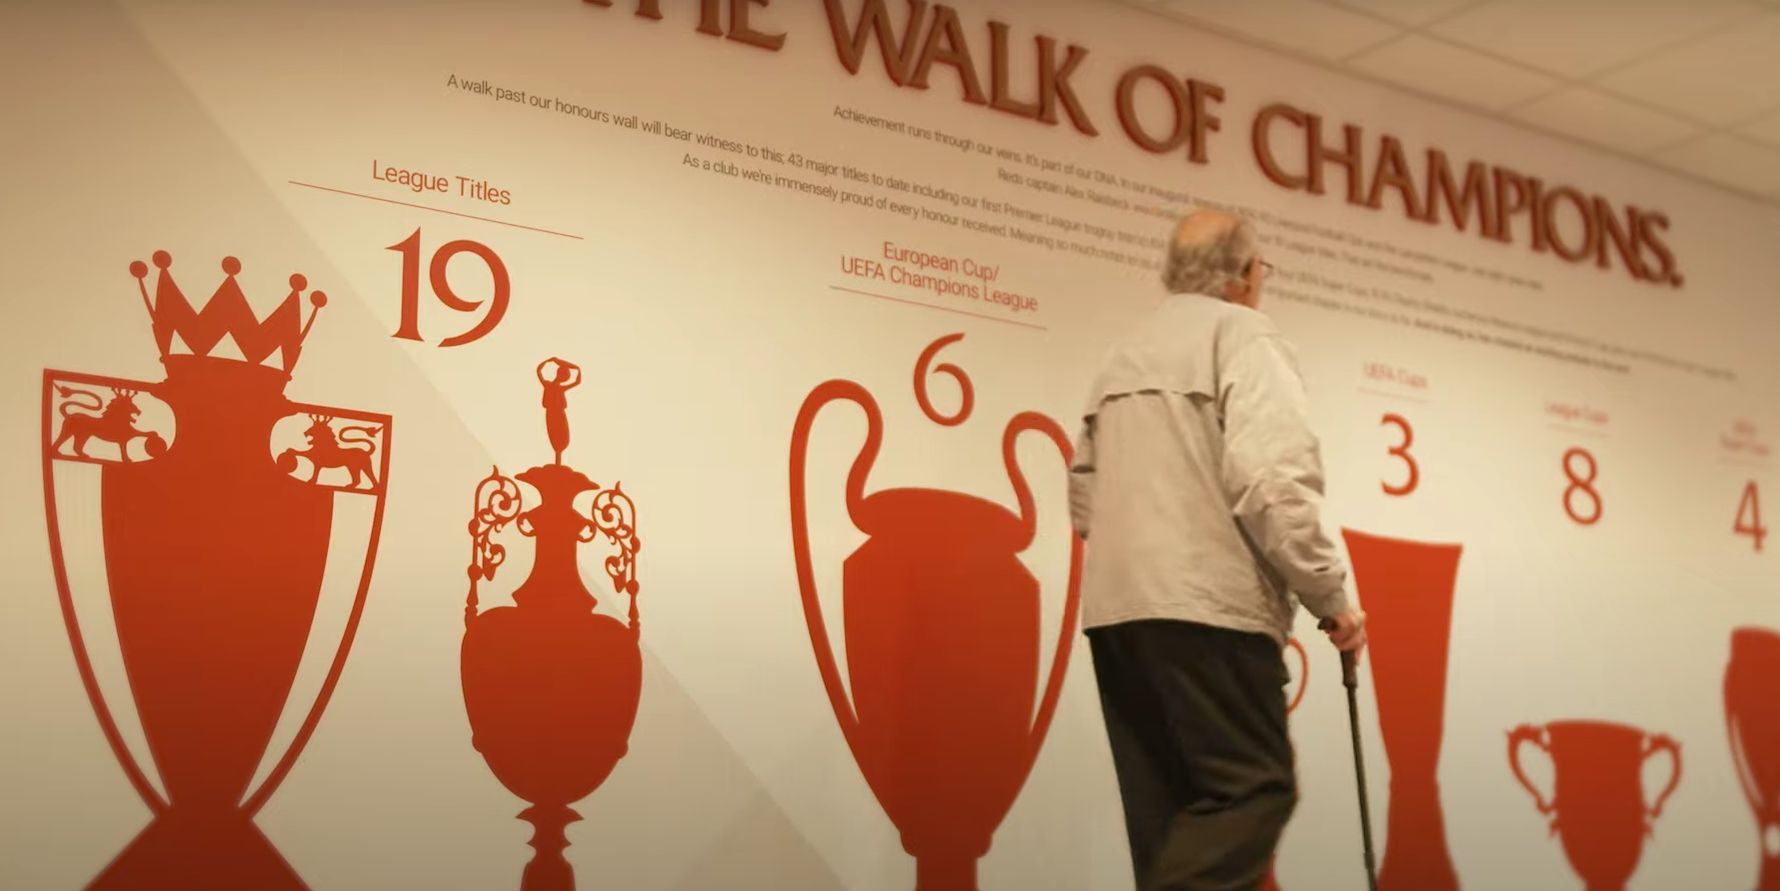 (Video) 98-year-old Liverpool fan shares his memories of supporting Liverpool since the 1920s